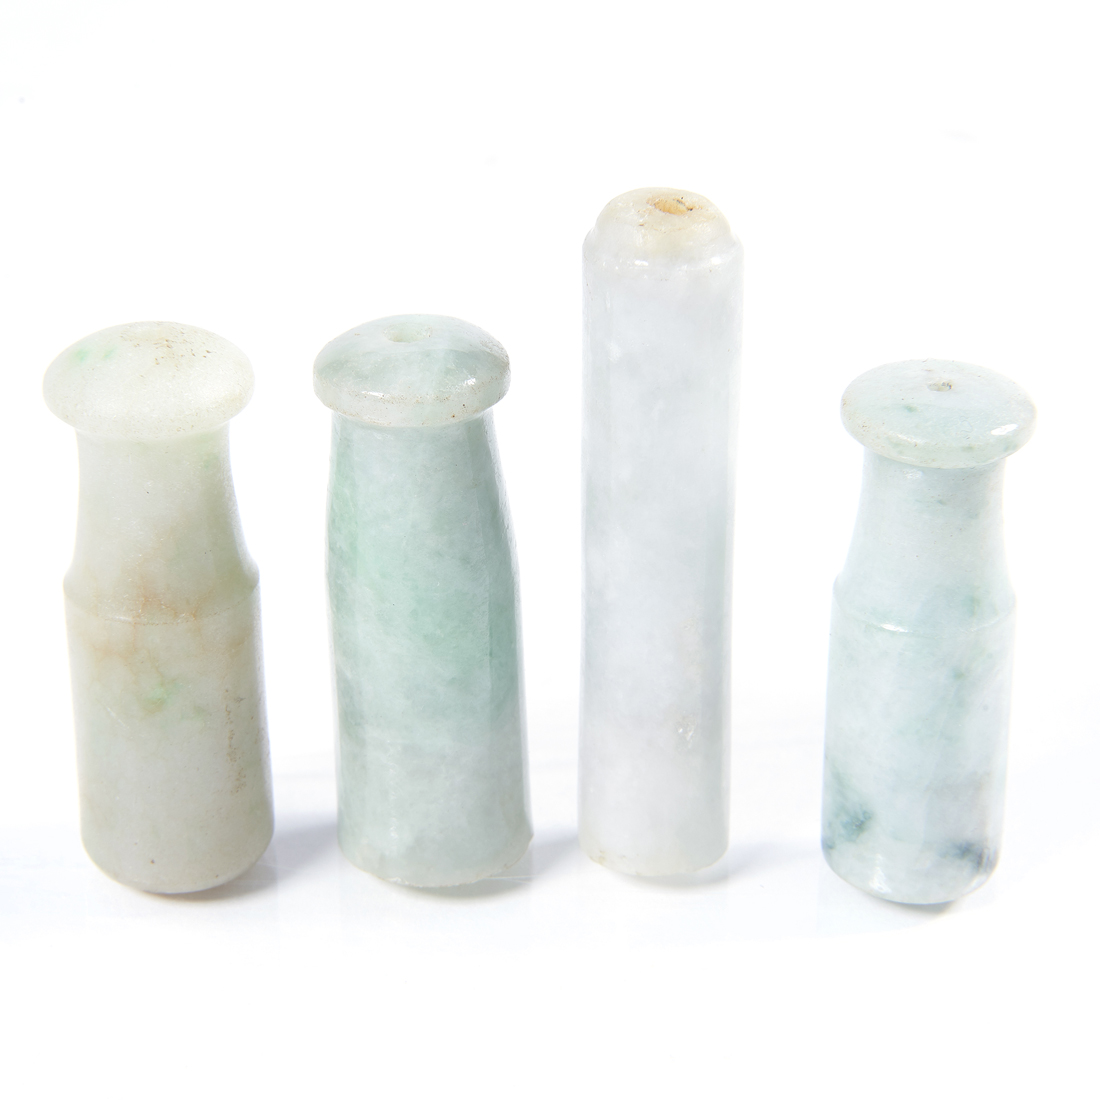  LOT OF 4 CHINESE JADEITE CIGARETTE 3a24d8